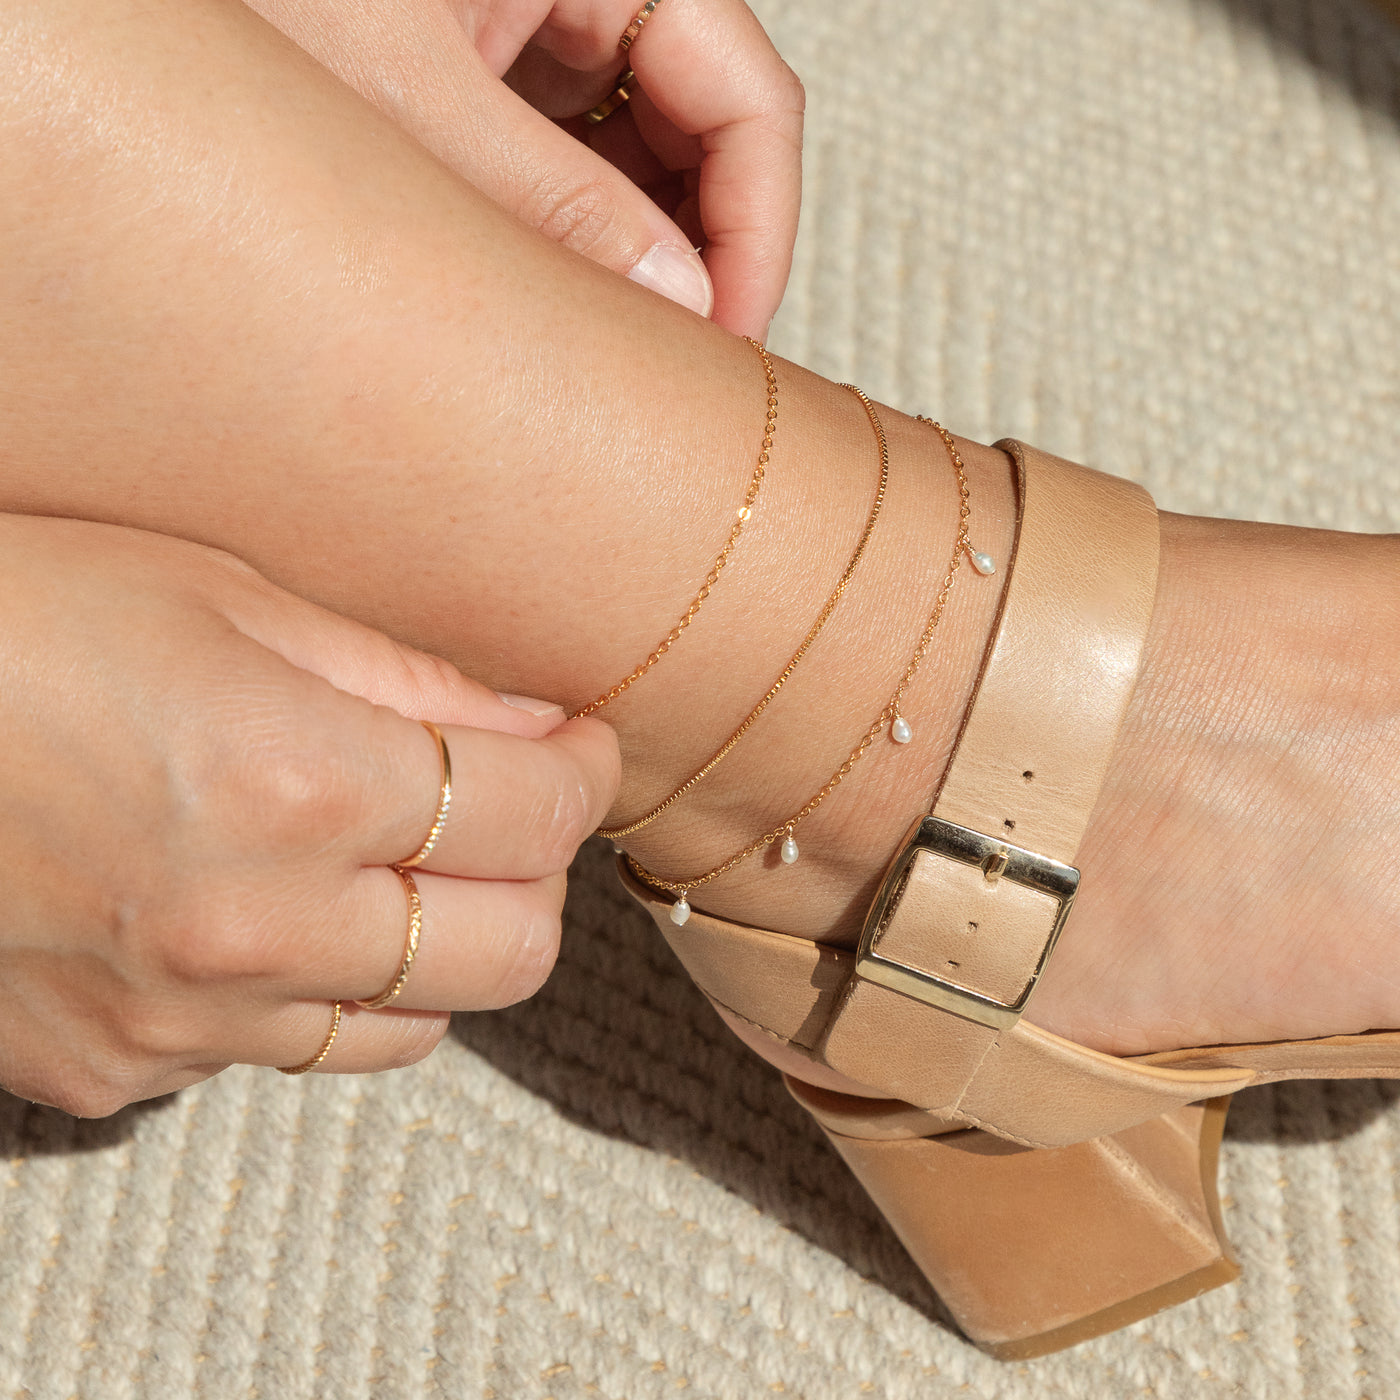 Thin Box Chain Anklet | Simple & Dainty Jewelry